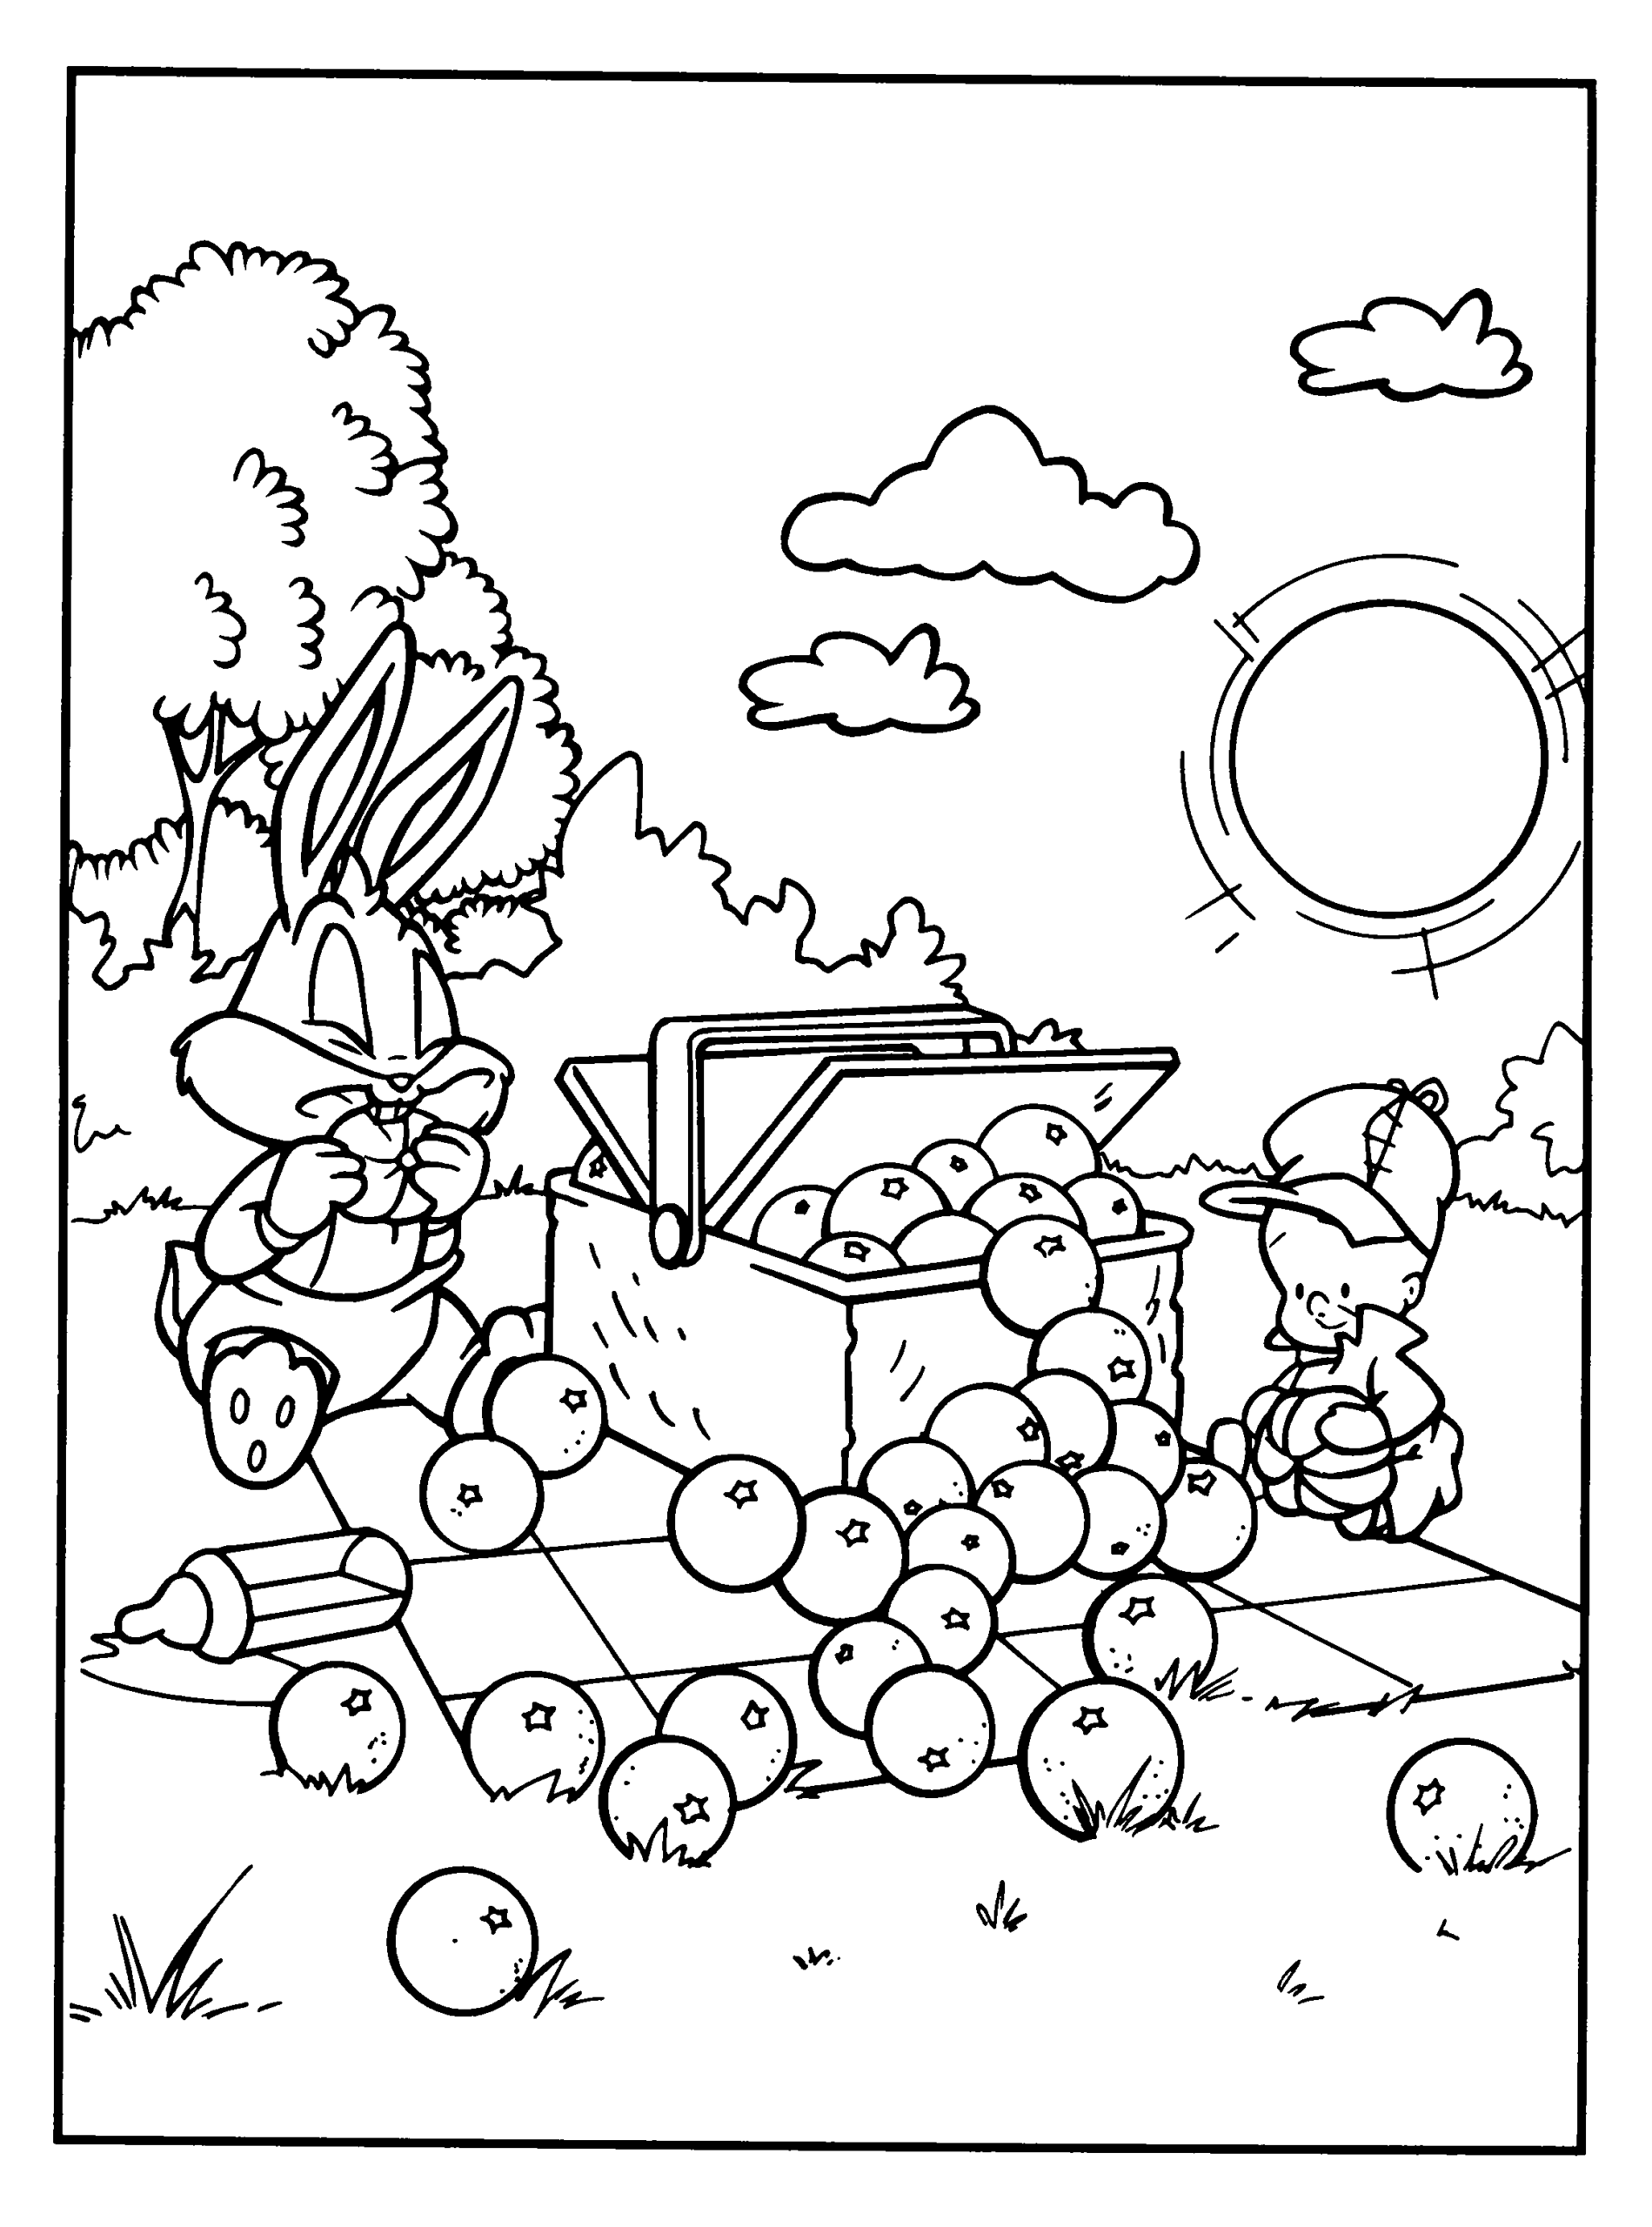 Looney Tunes Coloring Pages TV Film looney tunes 8 Printable 2020 04597 Coloring4free